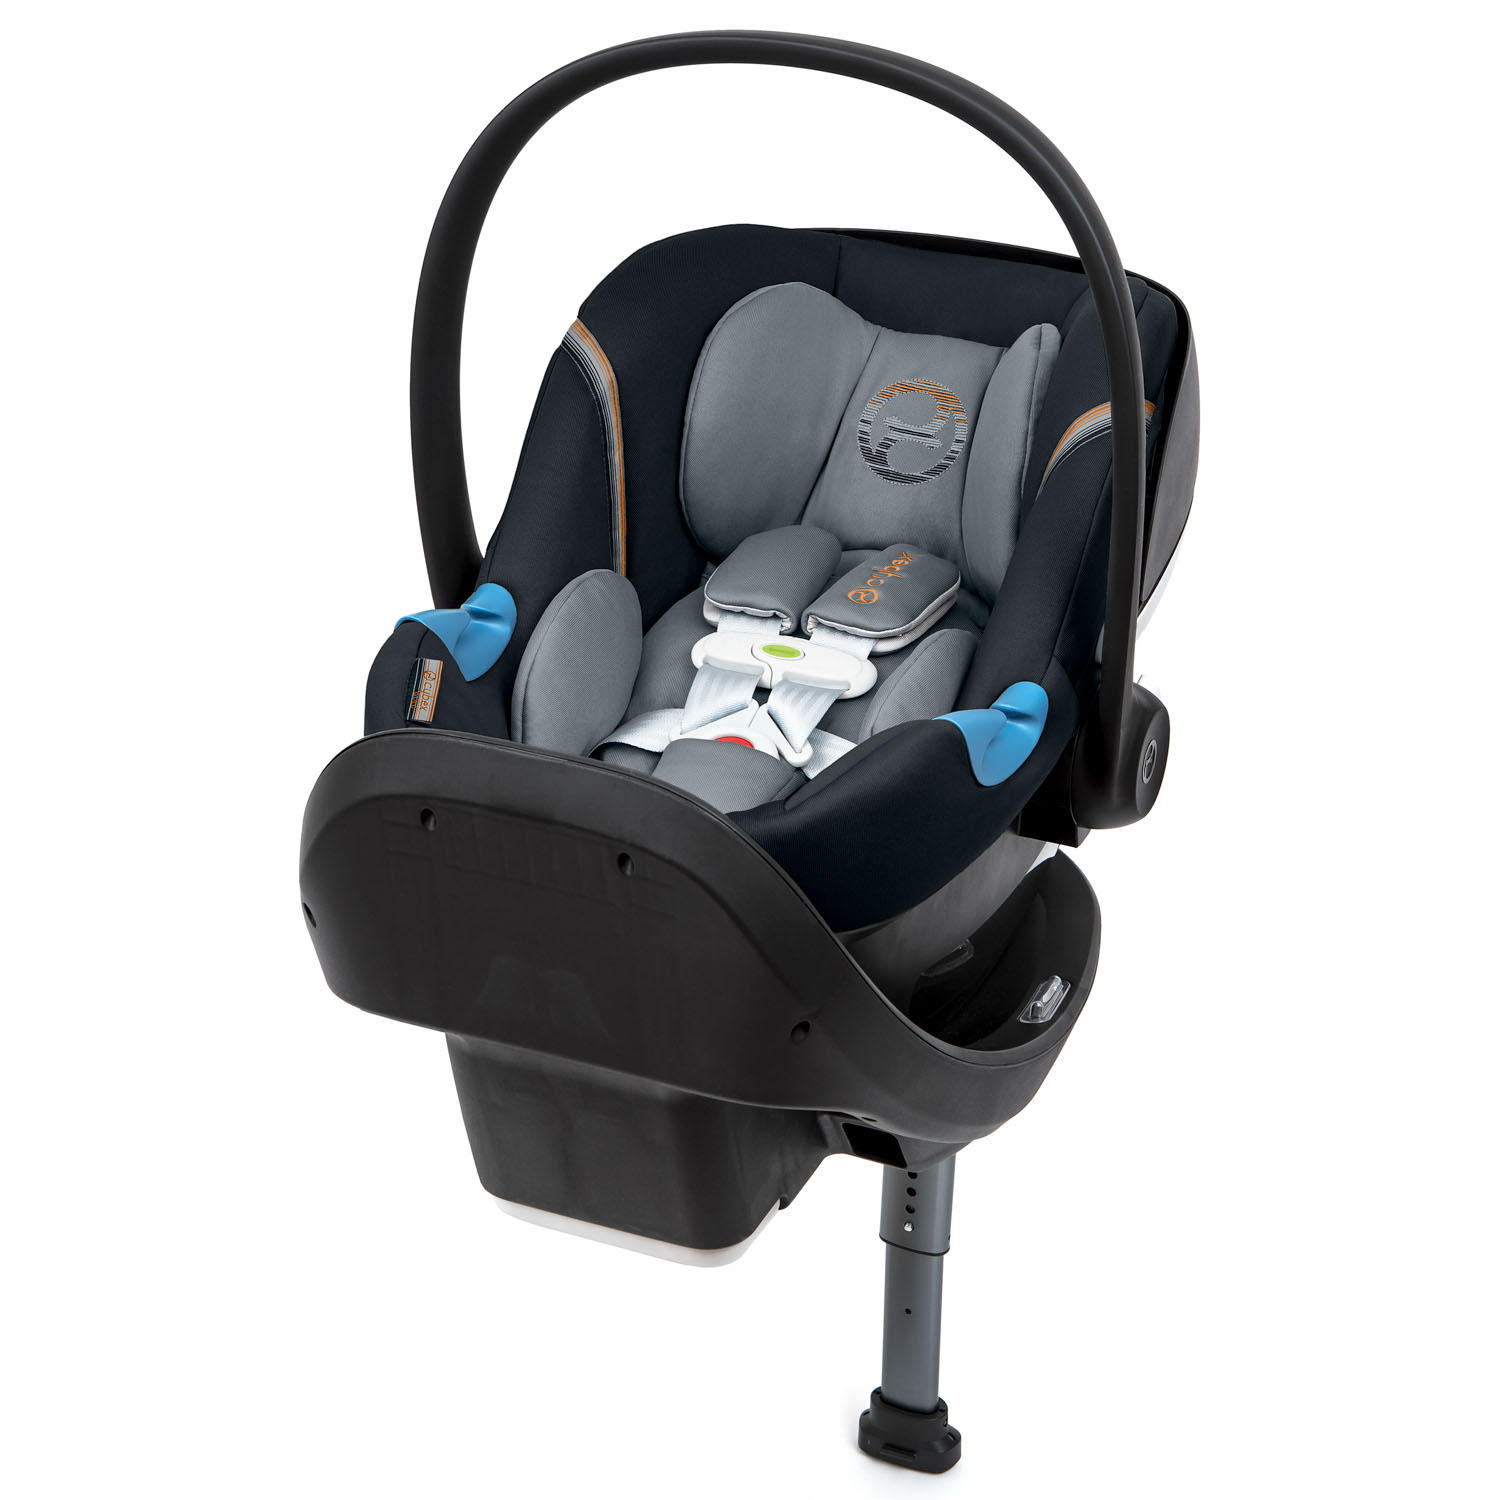 Cybex Aton M Infant Car Seat with SensorSafe and SafeLock Base